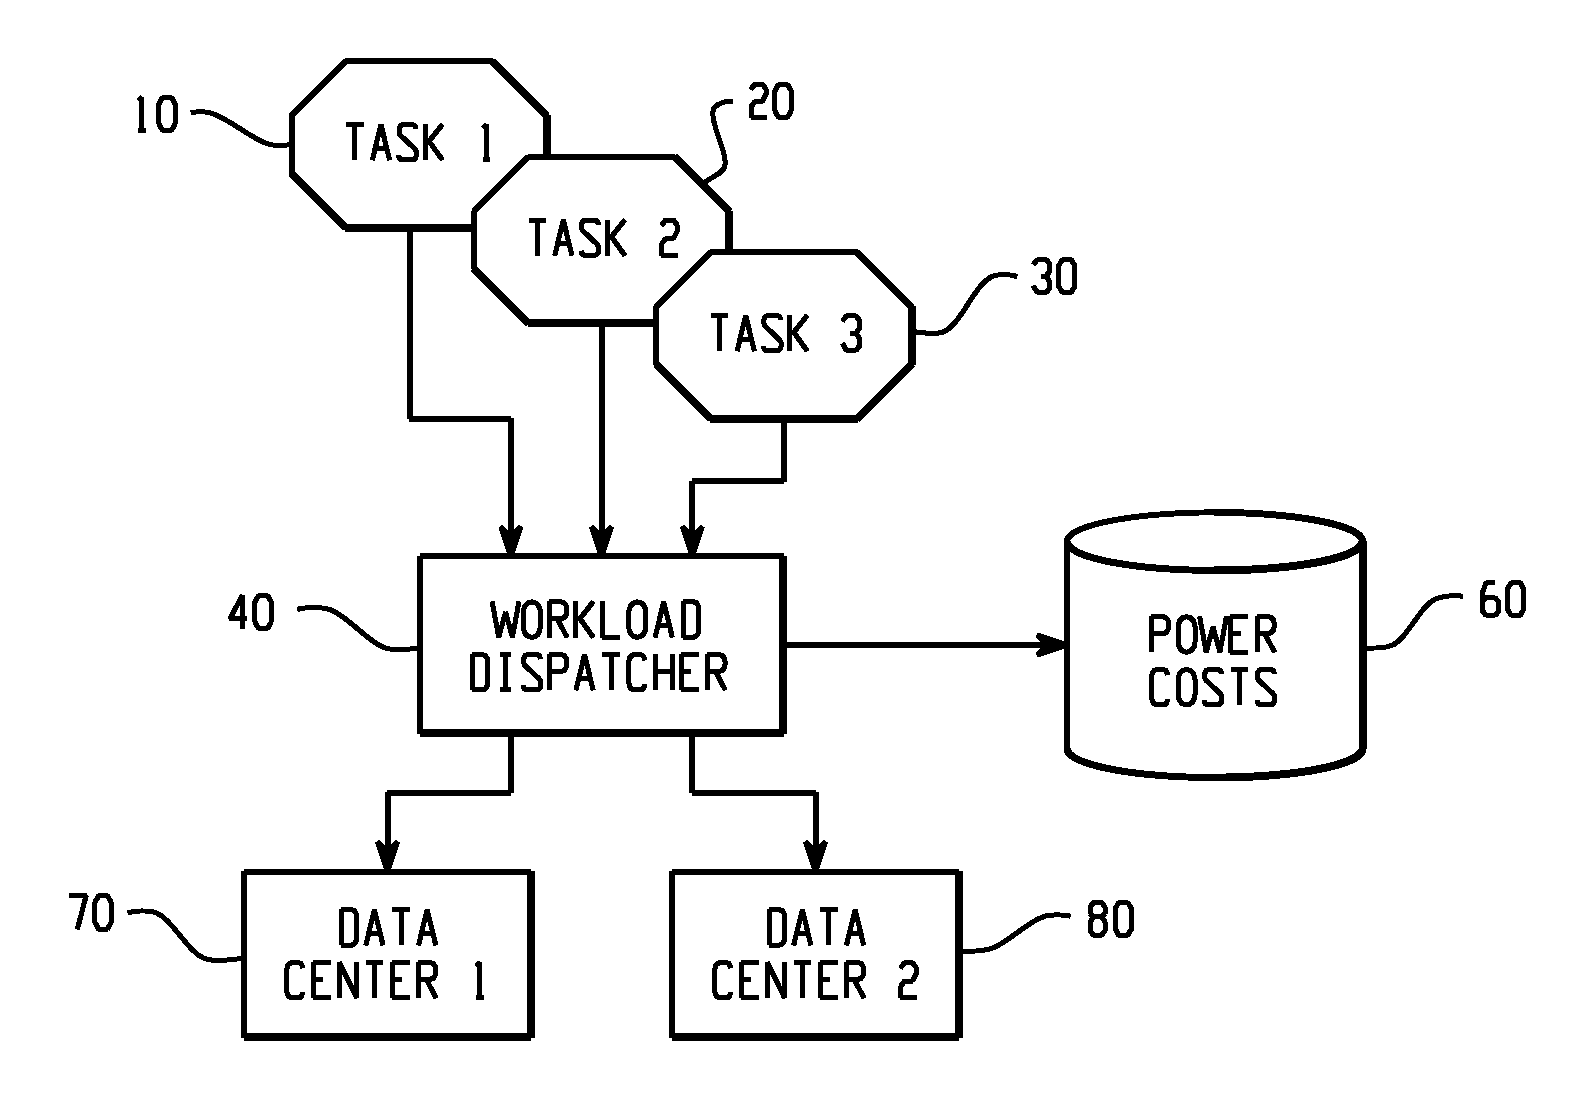 Framework for distribution of computer workloads based on real-time energy costs